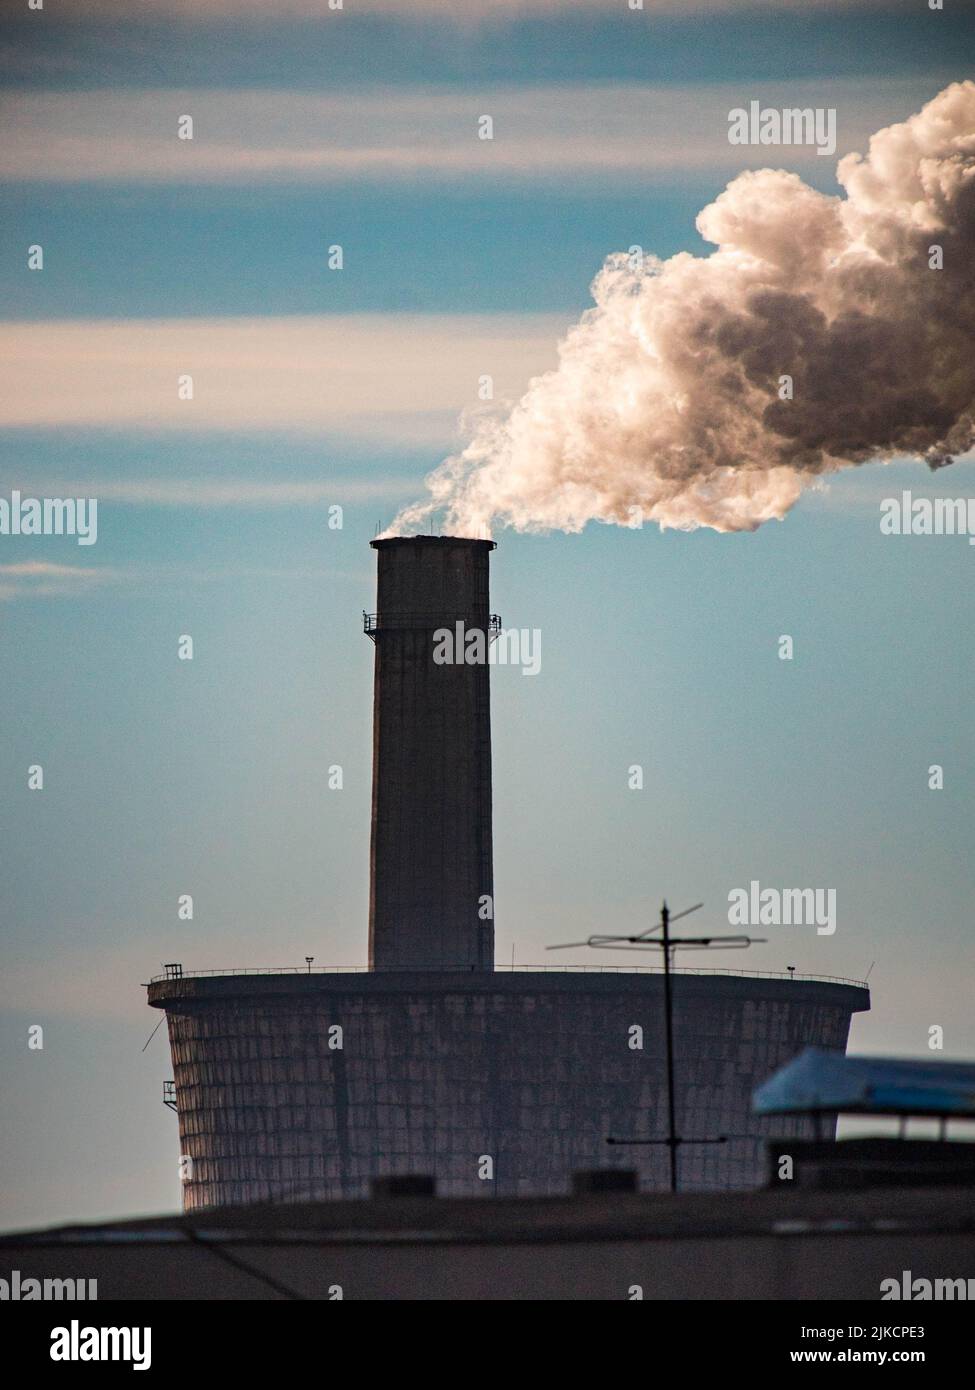 A dense smoke and steam coming out from the industrial chimney Stock Photo